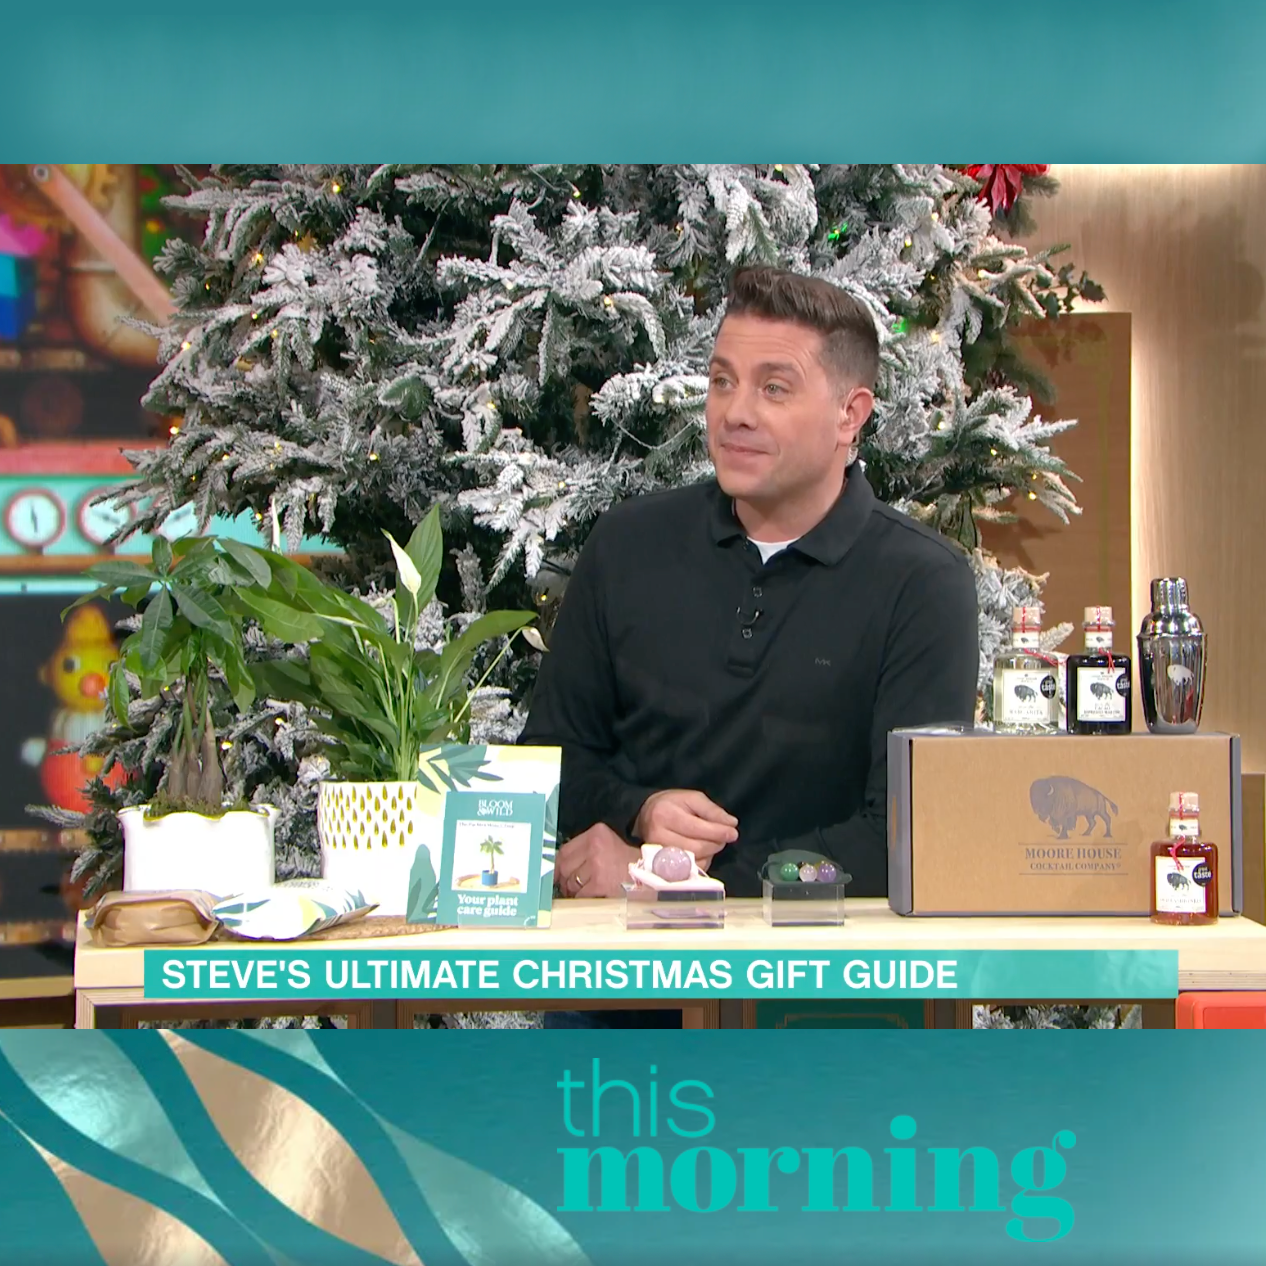 The Moore House Cocktail Company ‘Build a Cocktail Box’ featured on ITVs This Morning!